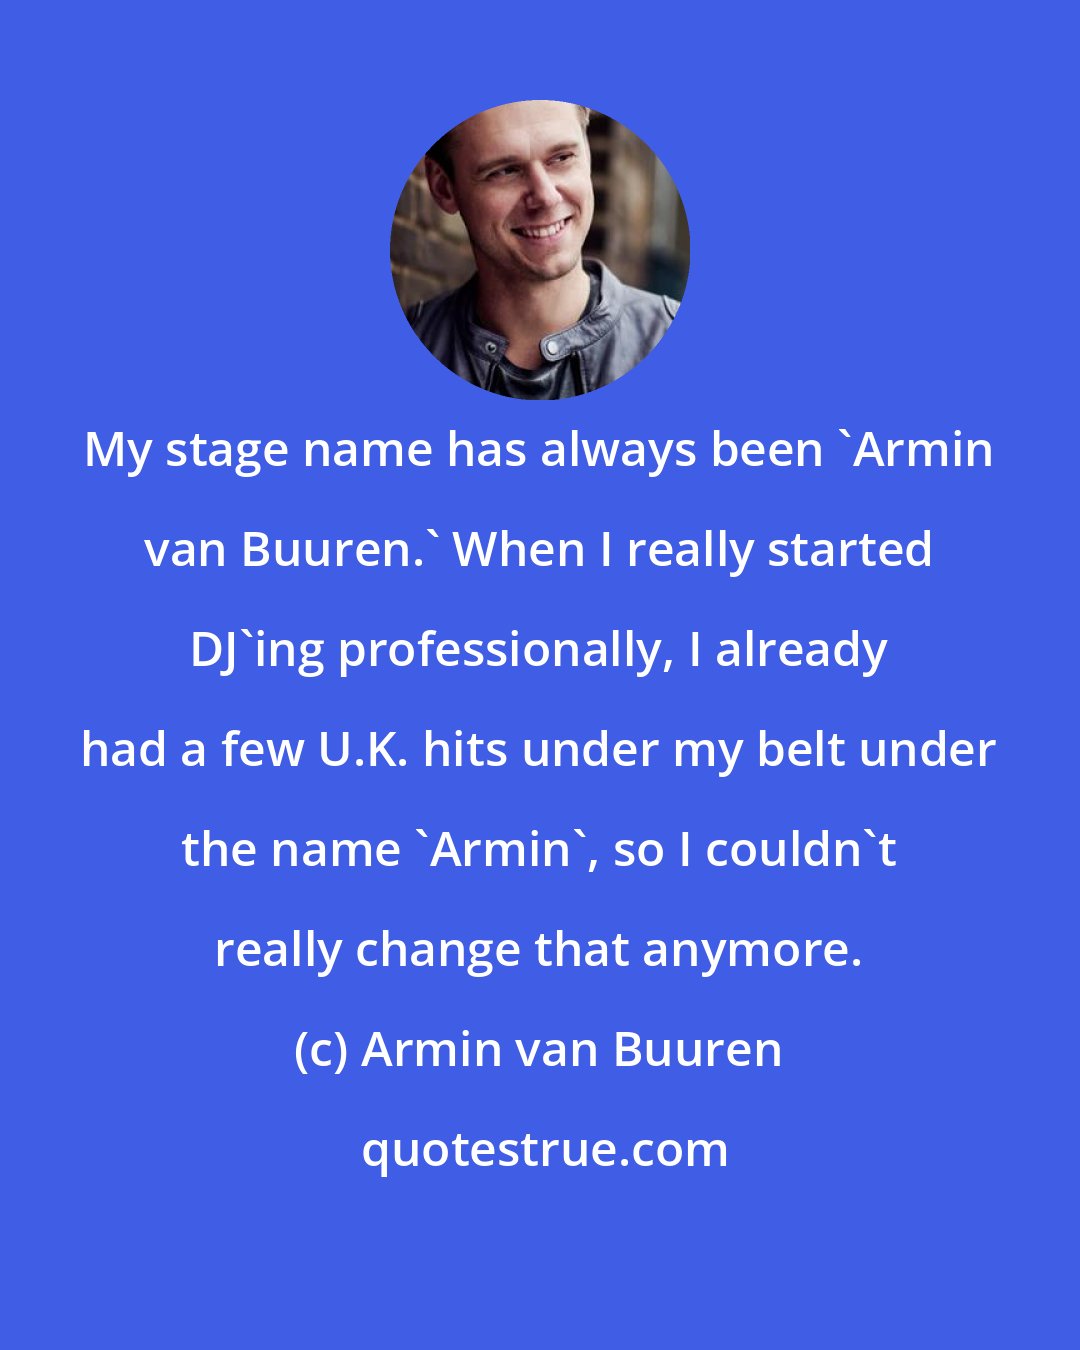 Armin van Buuren: My stage name has always been 'Armin van Buuren.' When I really started DJ'ing professionally, I already had a few U.K. hits under my belt under the name 'Armin', so I couldn't really change that anymore.